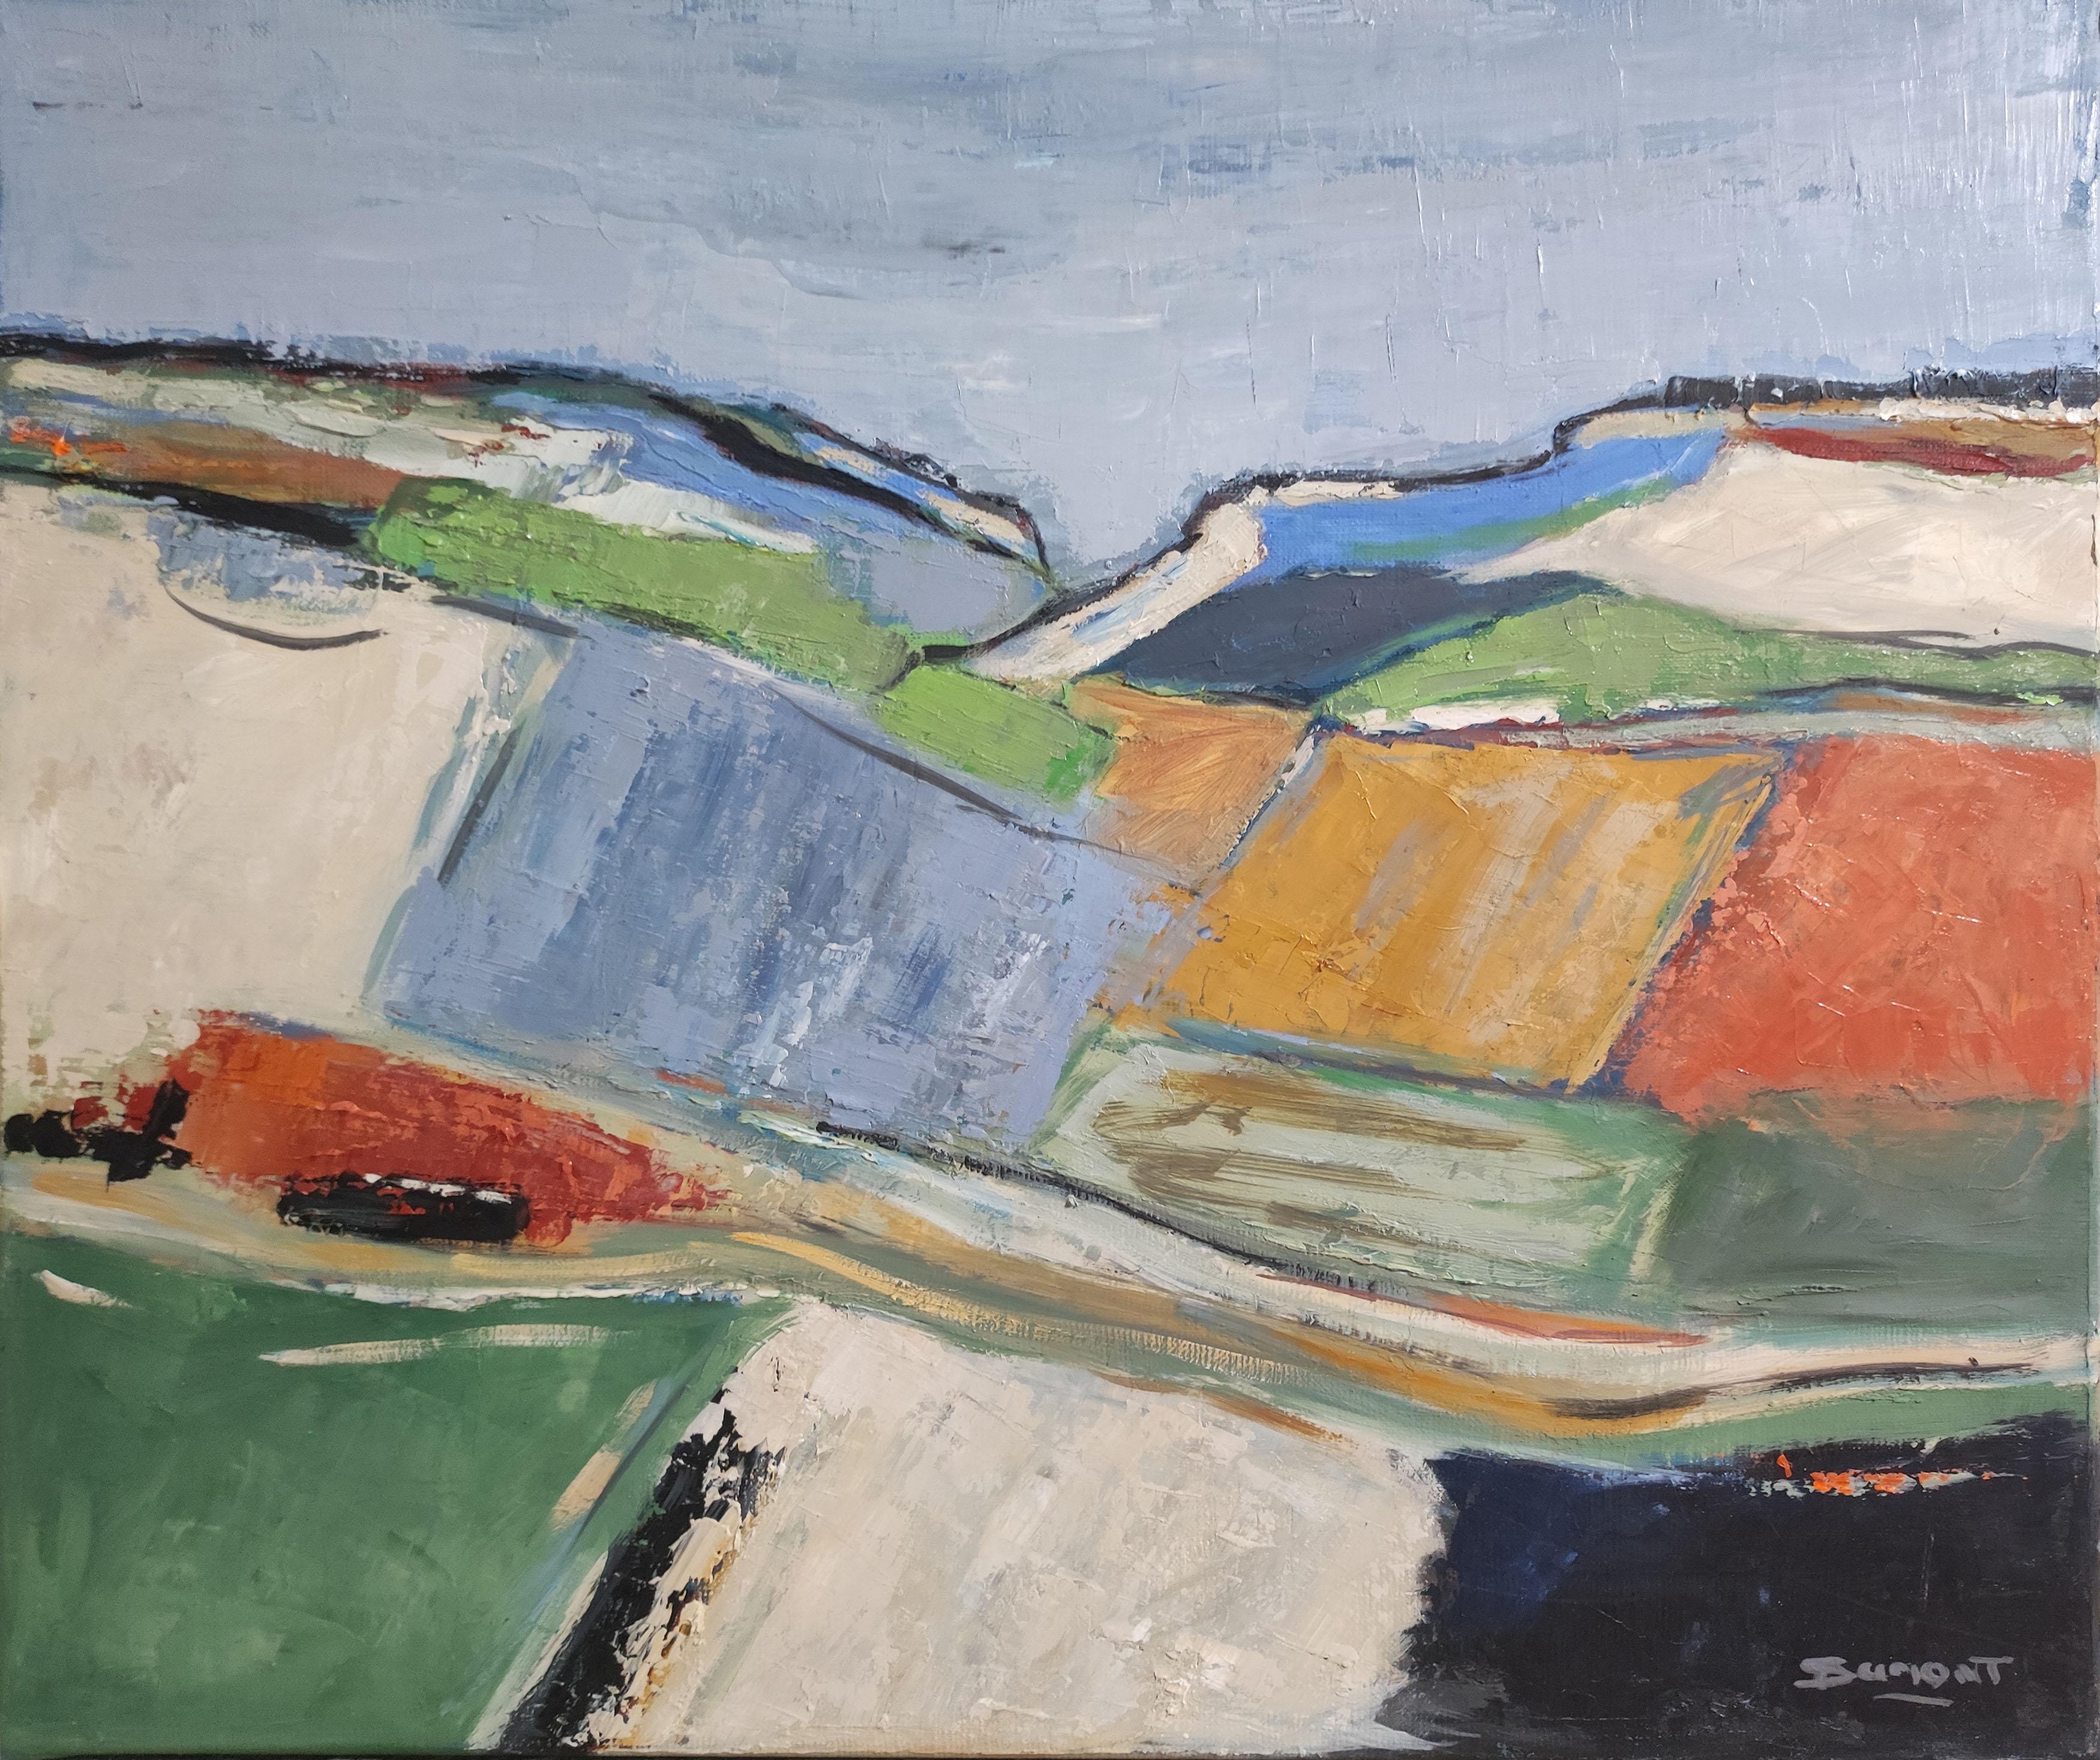 Abstract countryside landscape with colorful patches. Construction prevails over the motif; the artist works on their composition until finding the perfect balance. The numerous layers overlaid with a palette knife create an interesting texture.